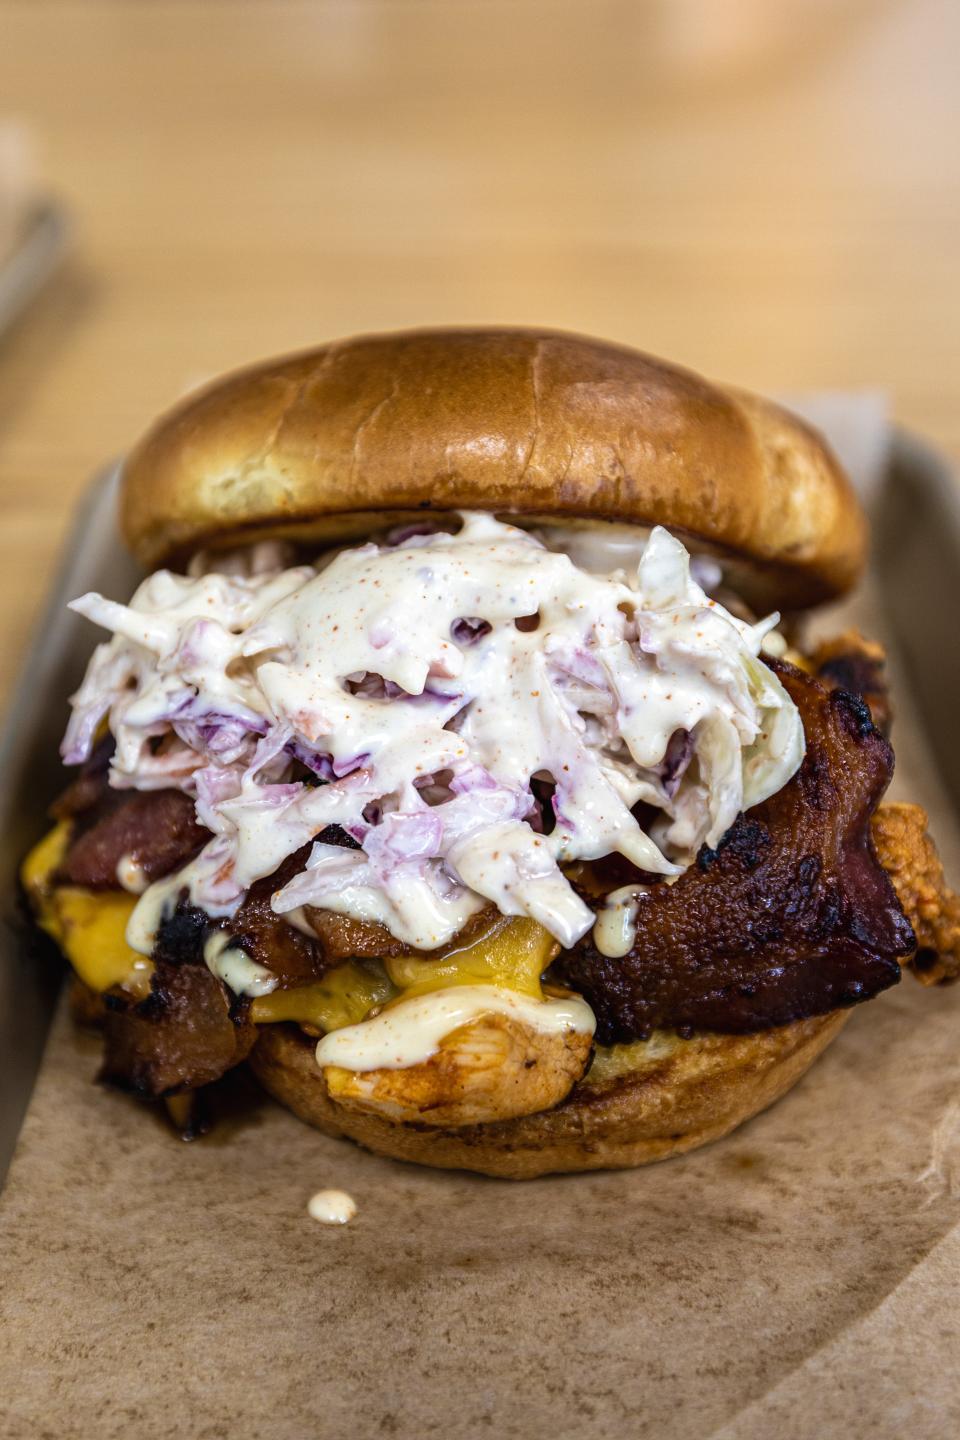 The Eatery’s chipotle chicken sandwich features smoky chipotle chicken, cheddar cheese, maple bacon, Alabama white sauce and served on a brioche bun.